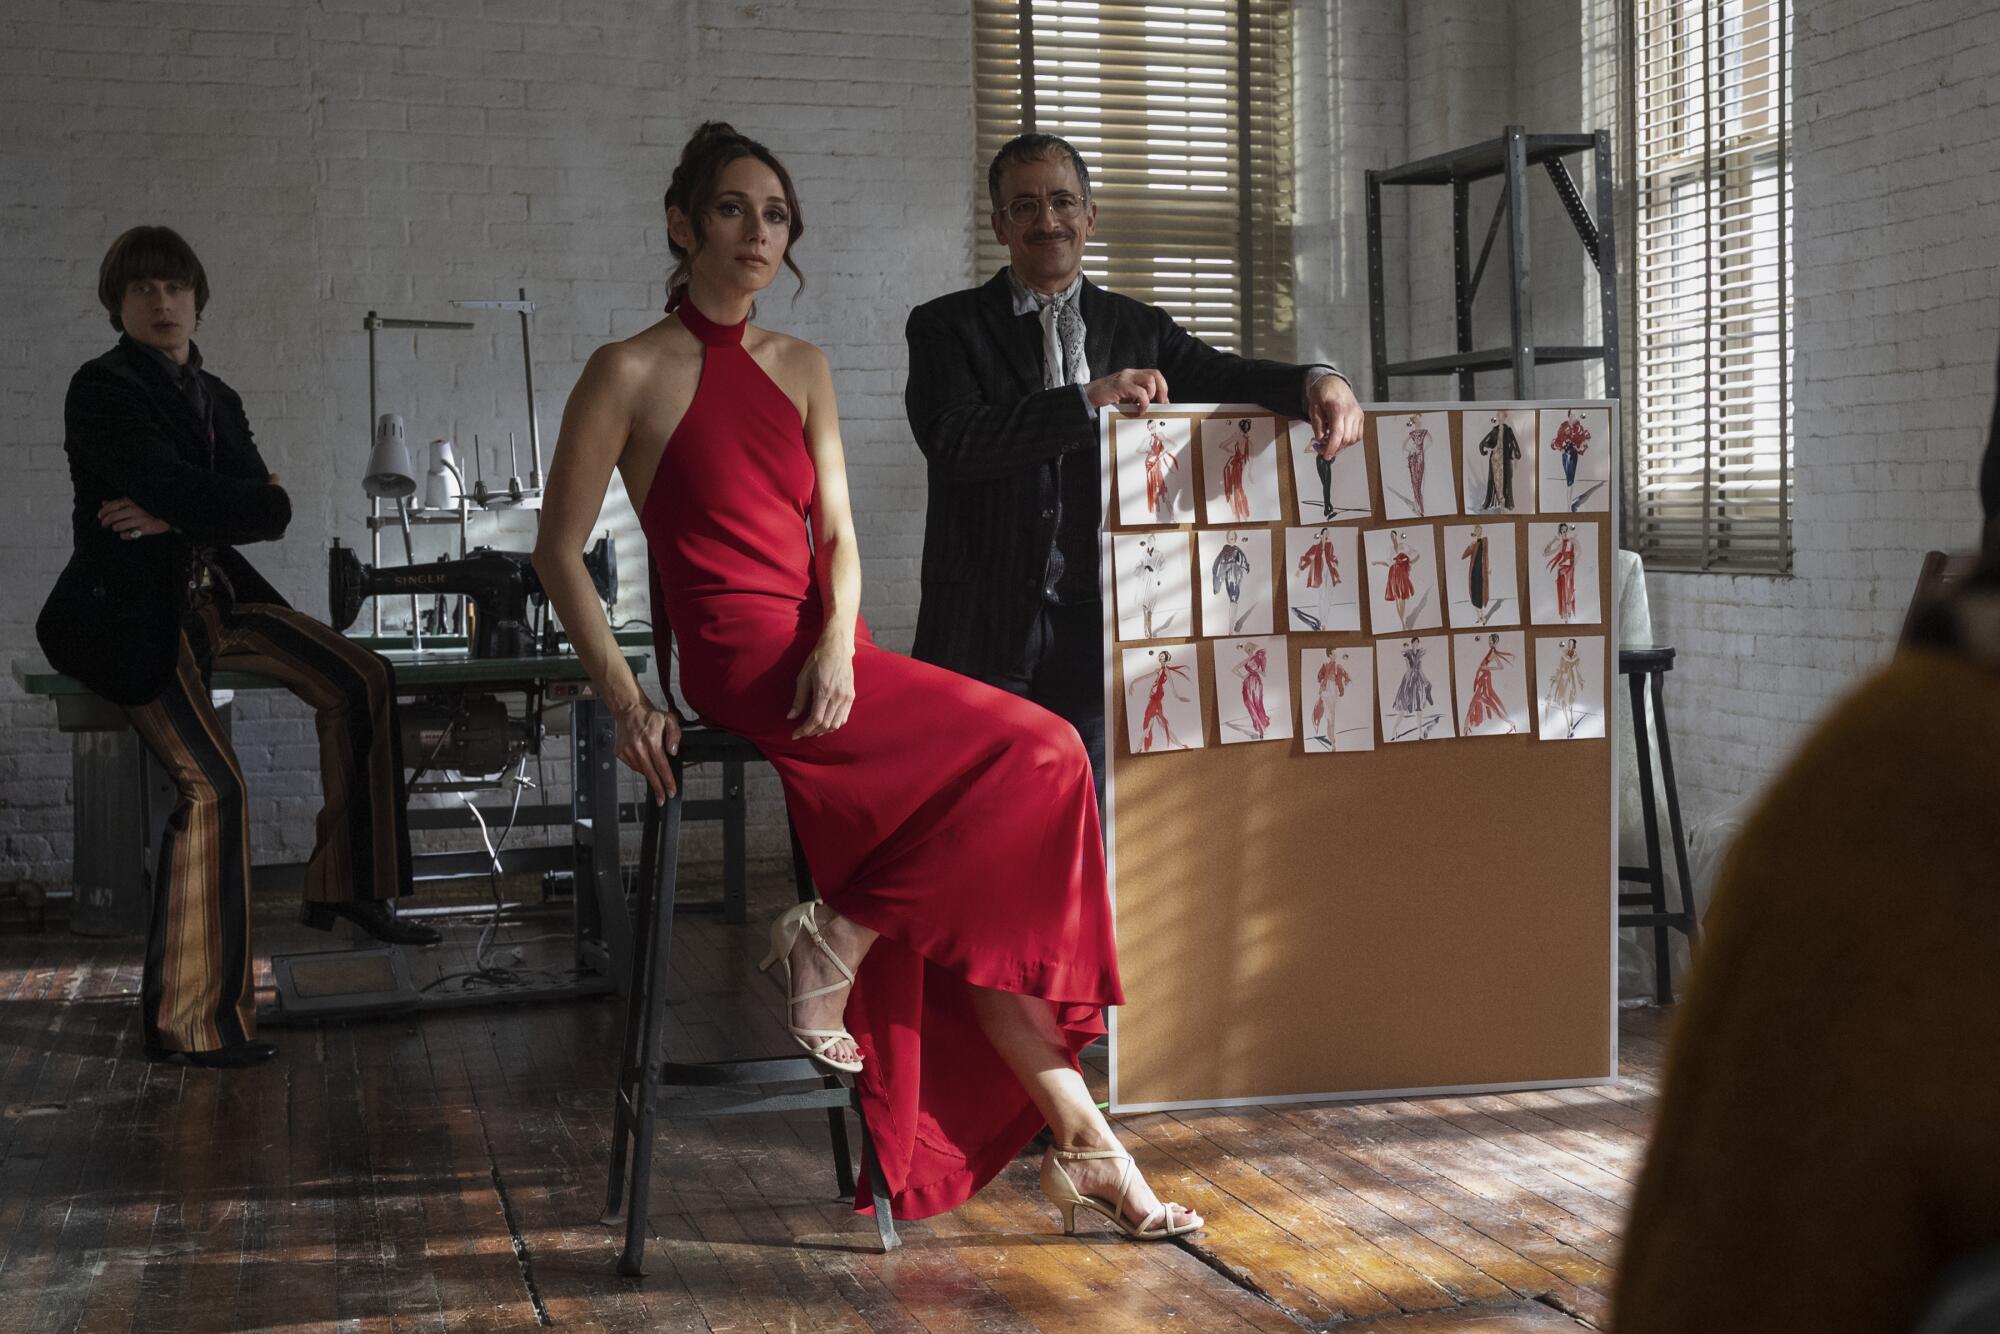 A woman shows off a crimson halter dress by Halston in a scene from "Halston."